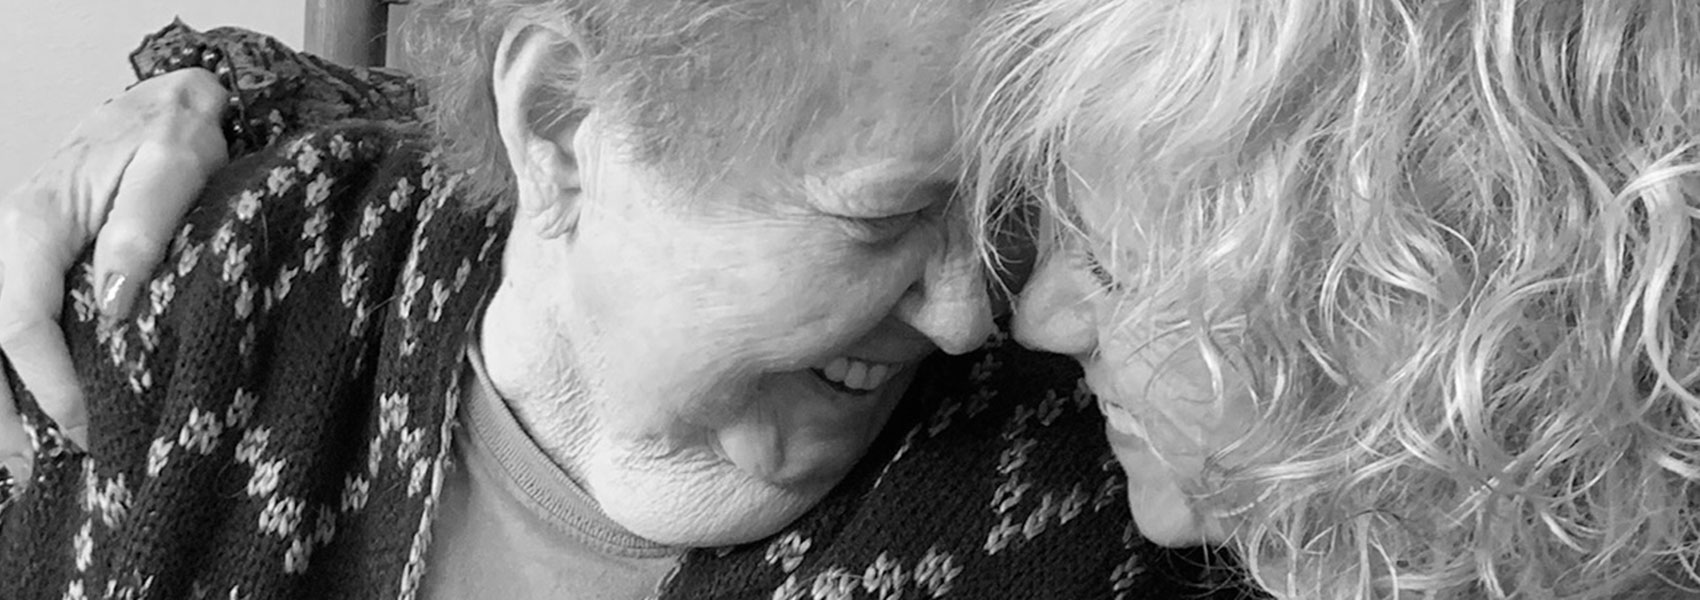 It’s never too late: How a mother and daughter found each other 60 years after an adoption  Banner Image